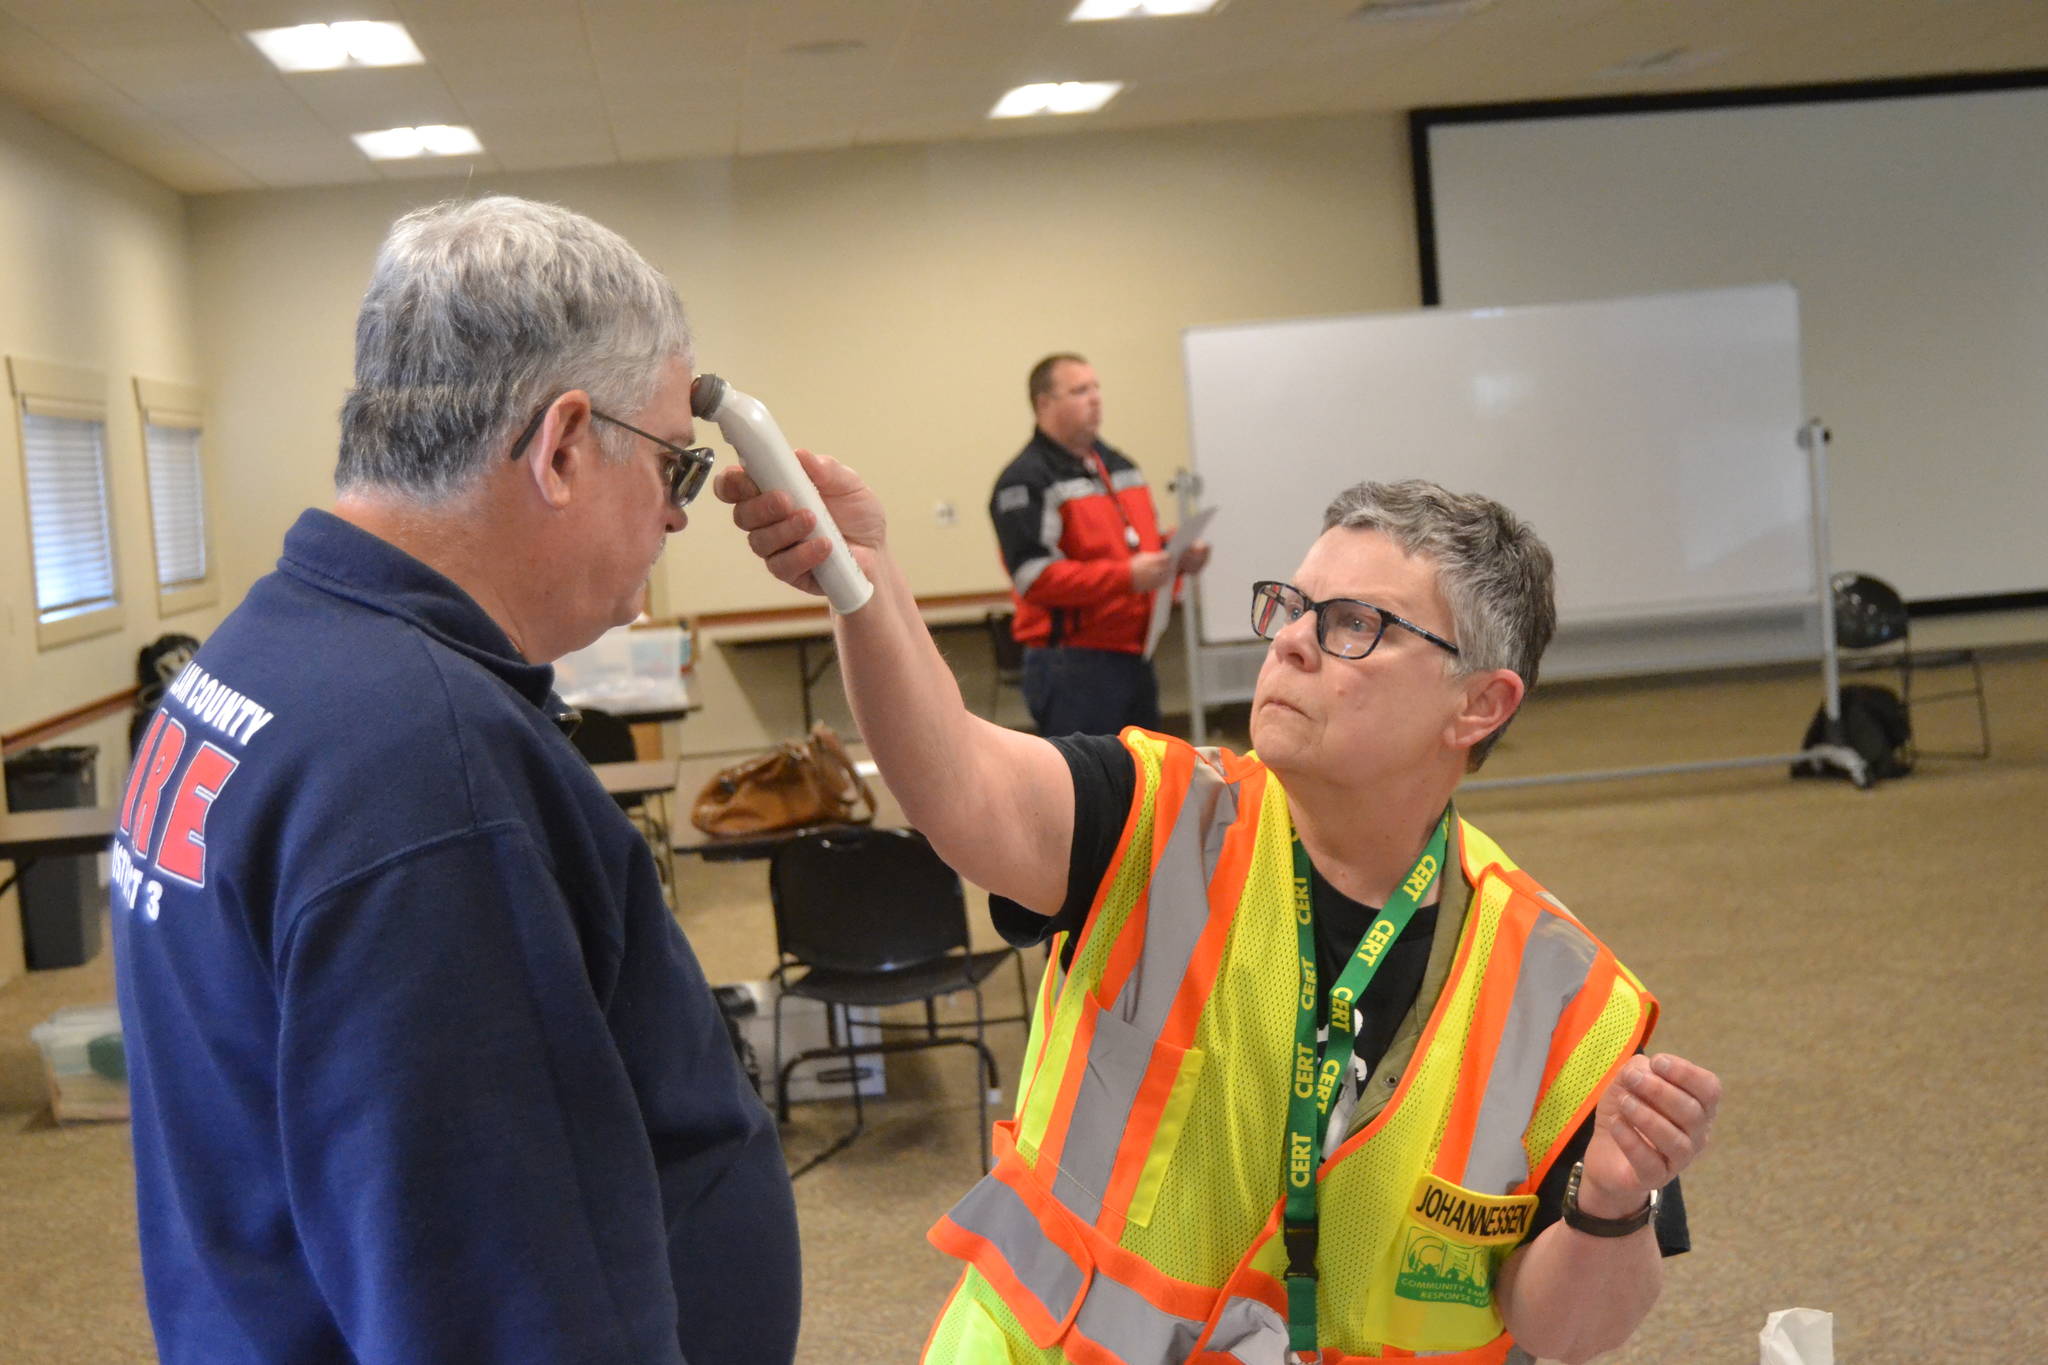 Linda Johannessen, Community Emergency Response Team No. 9 member, checks the temperature of firefighter/EMT Jeff Nicholas before he enters the Emergency Coordinating Center in the Guy Cole Event Center on March 23. Sequim’s response to COVID-19 will work out of the facility for the immediate future. Sequim Gazette photo by Matthew Nash